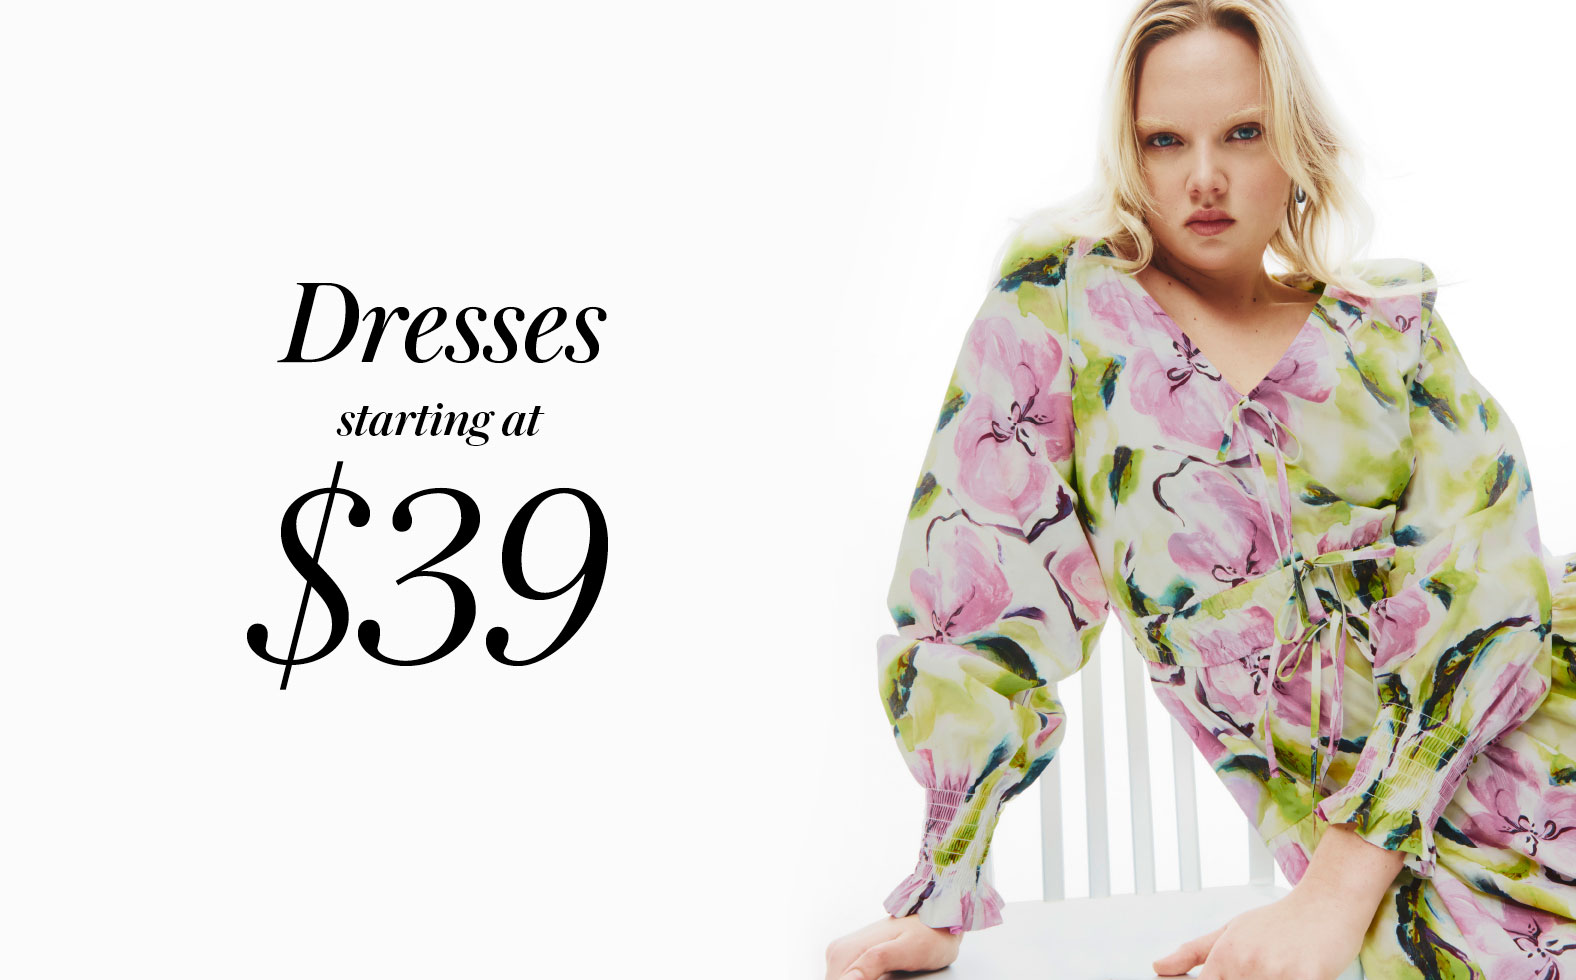 Plus size Clothing, Dresses, Skirts, Suits, Tops, Jeans and Pants